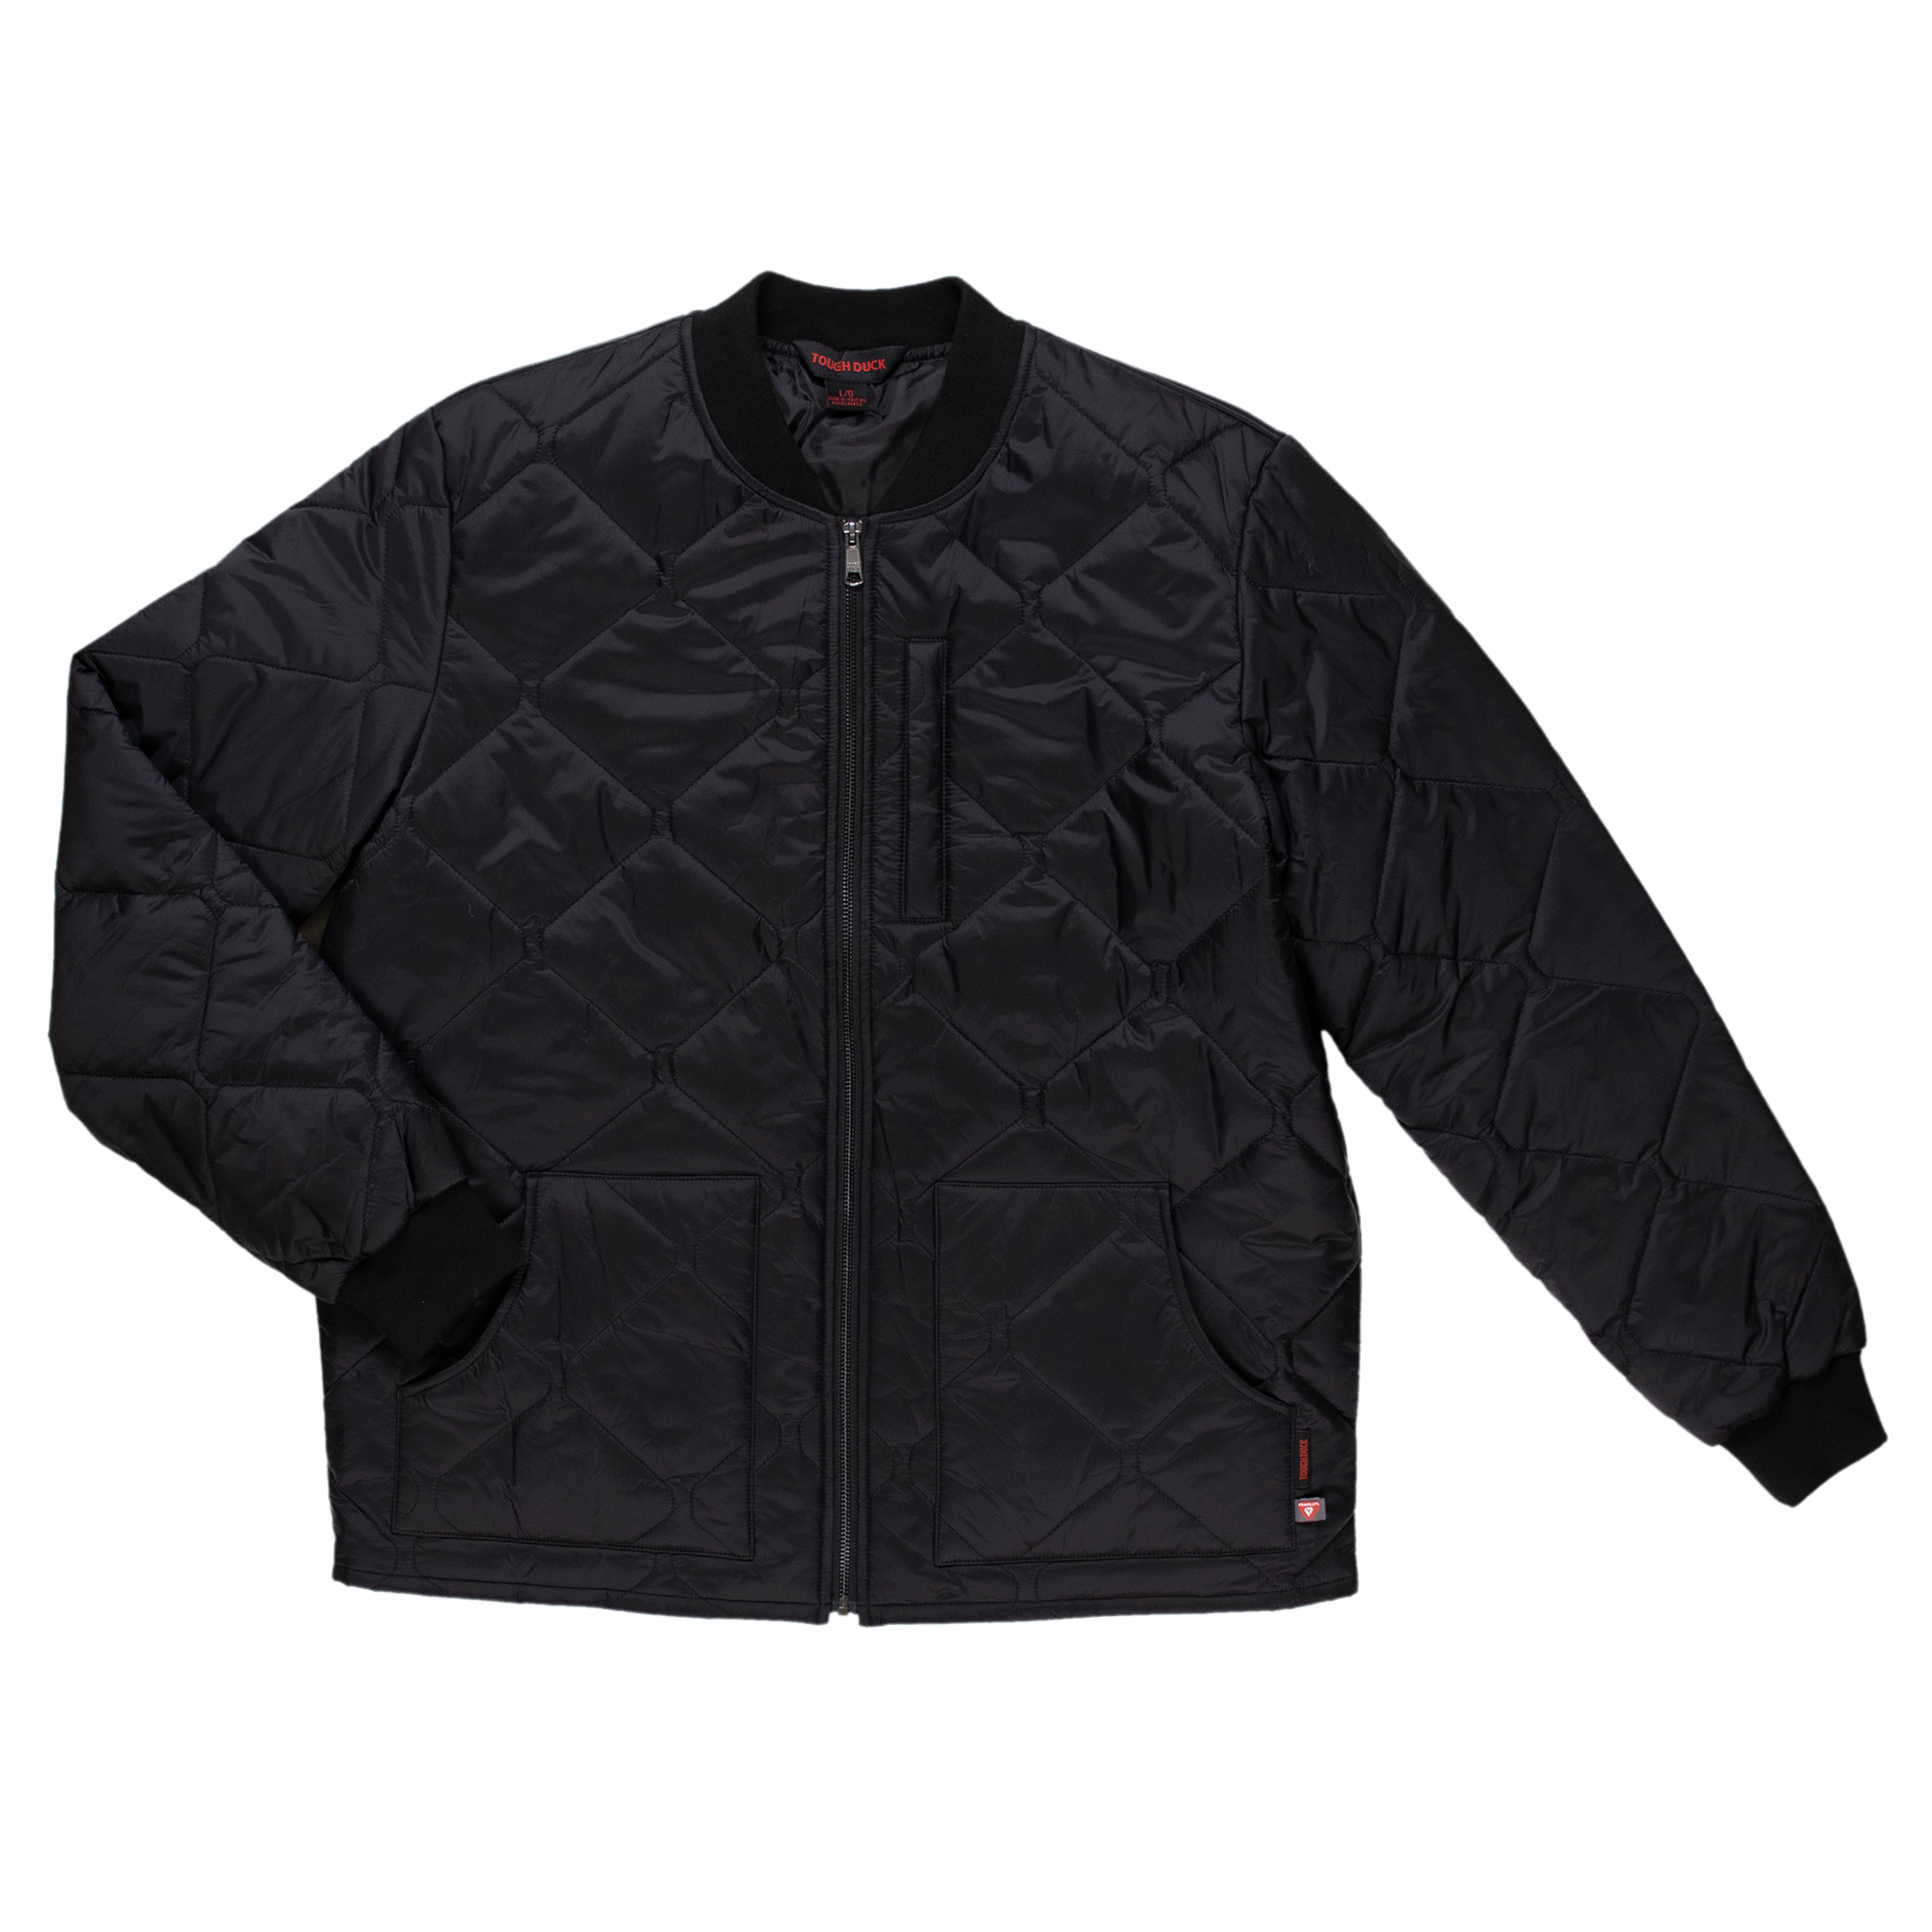 Tough Duck Quilted Jacket | Northern Tool